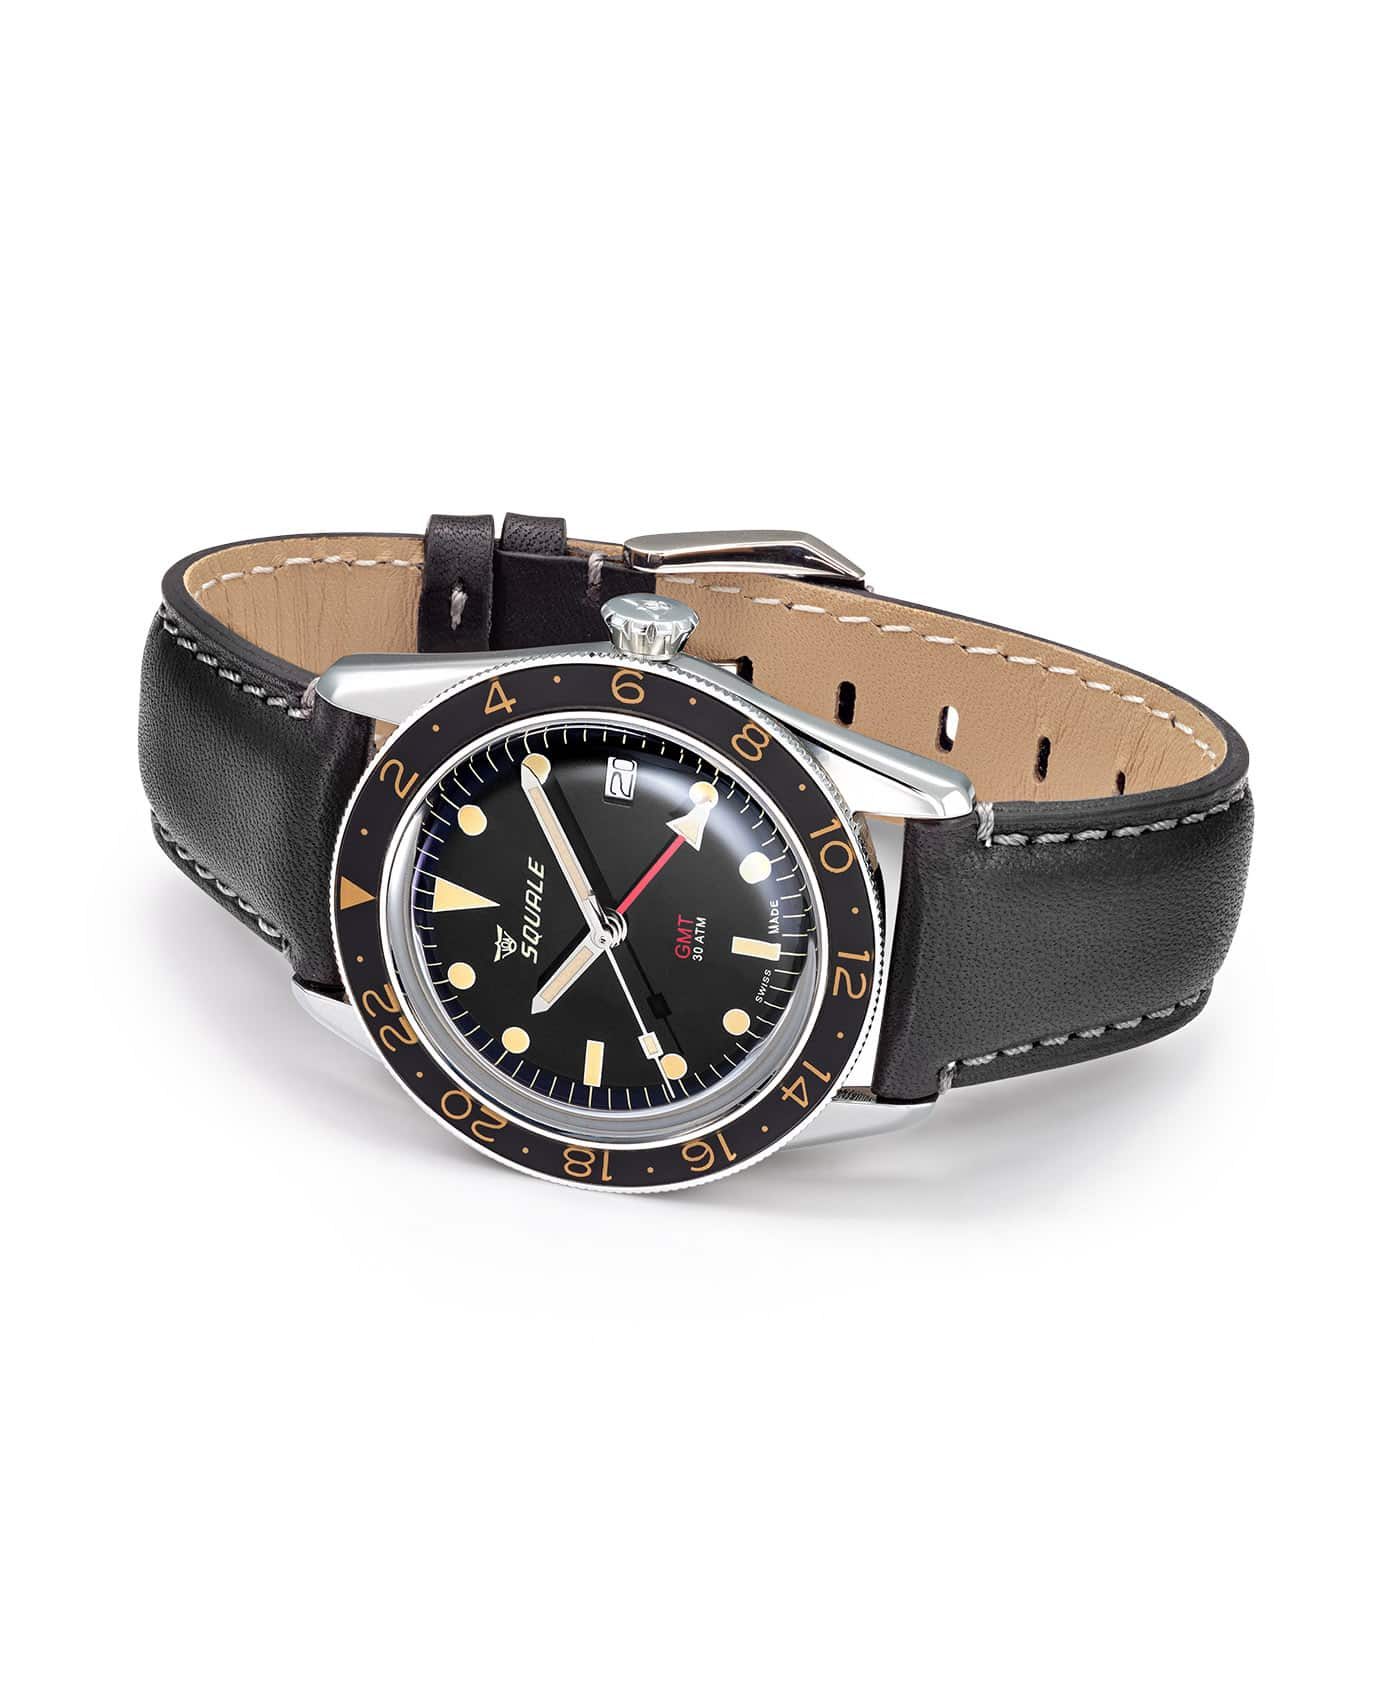 Squale SUB-39 GMT side